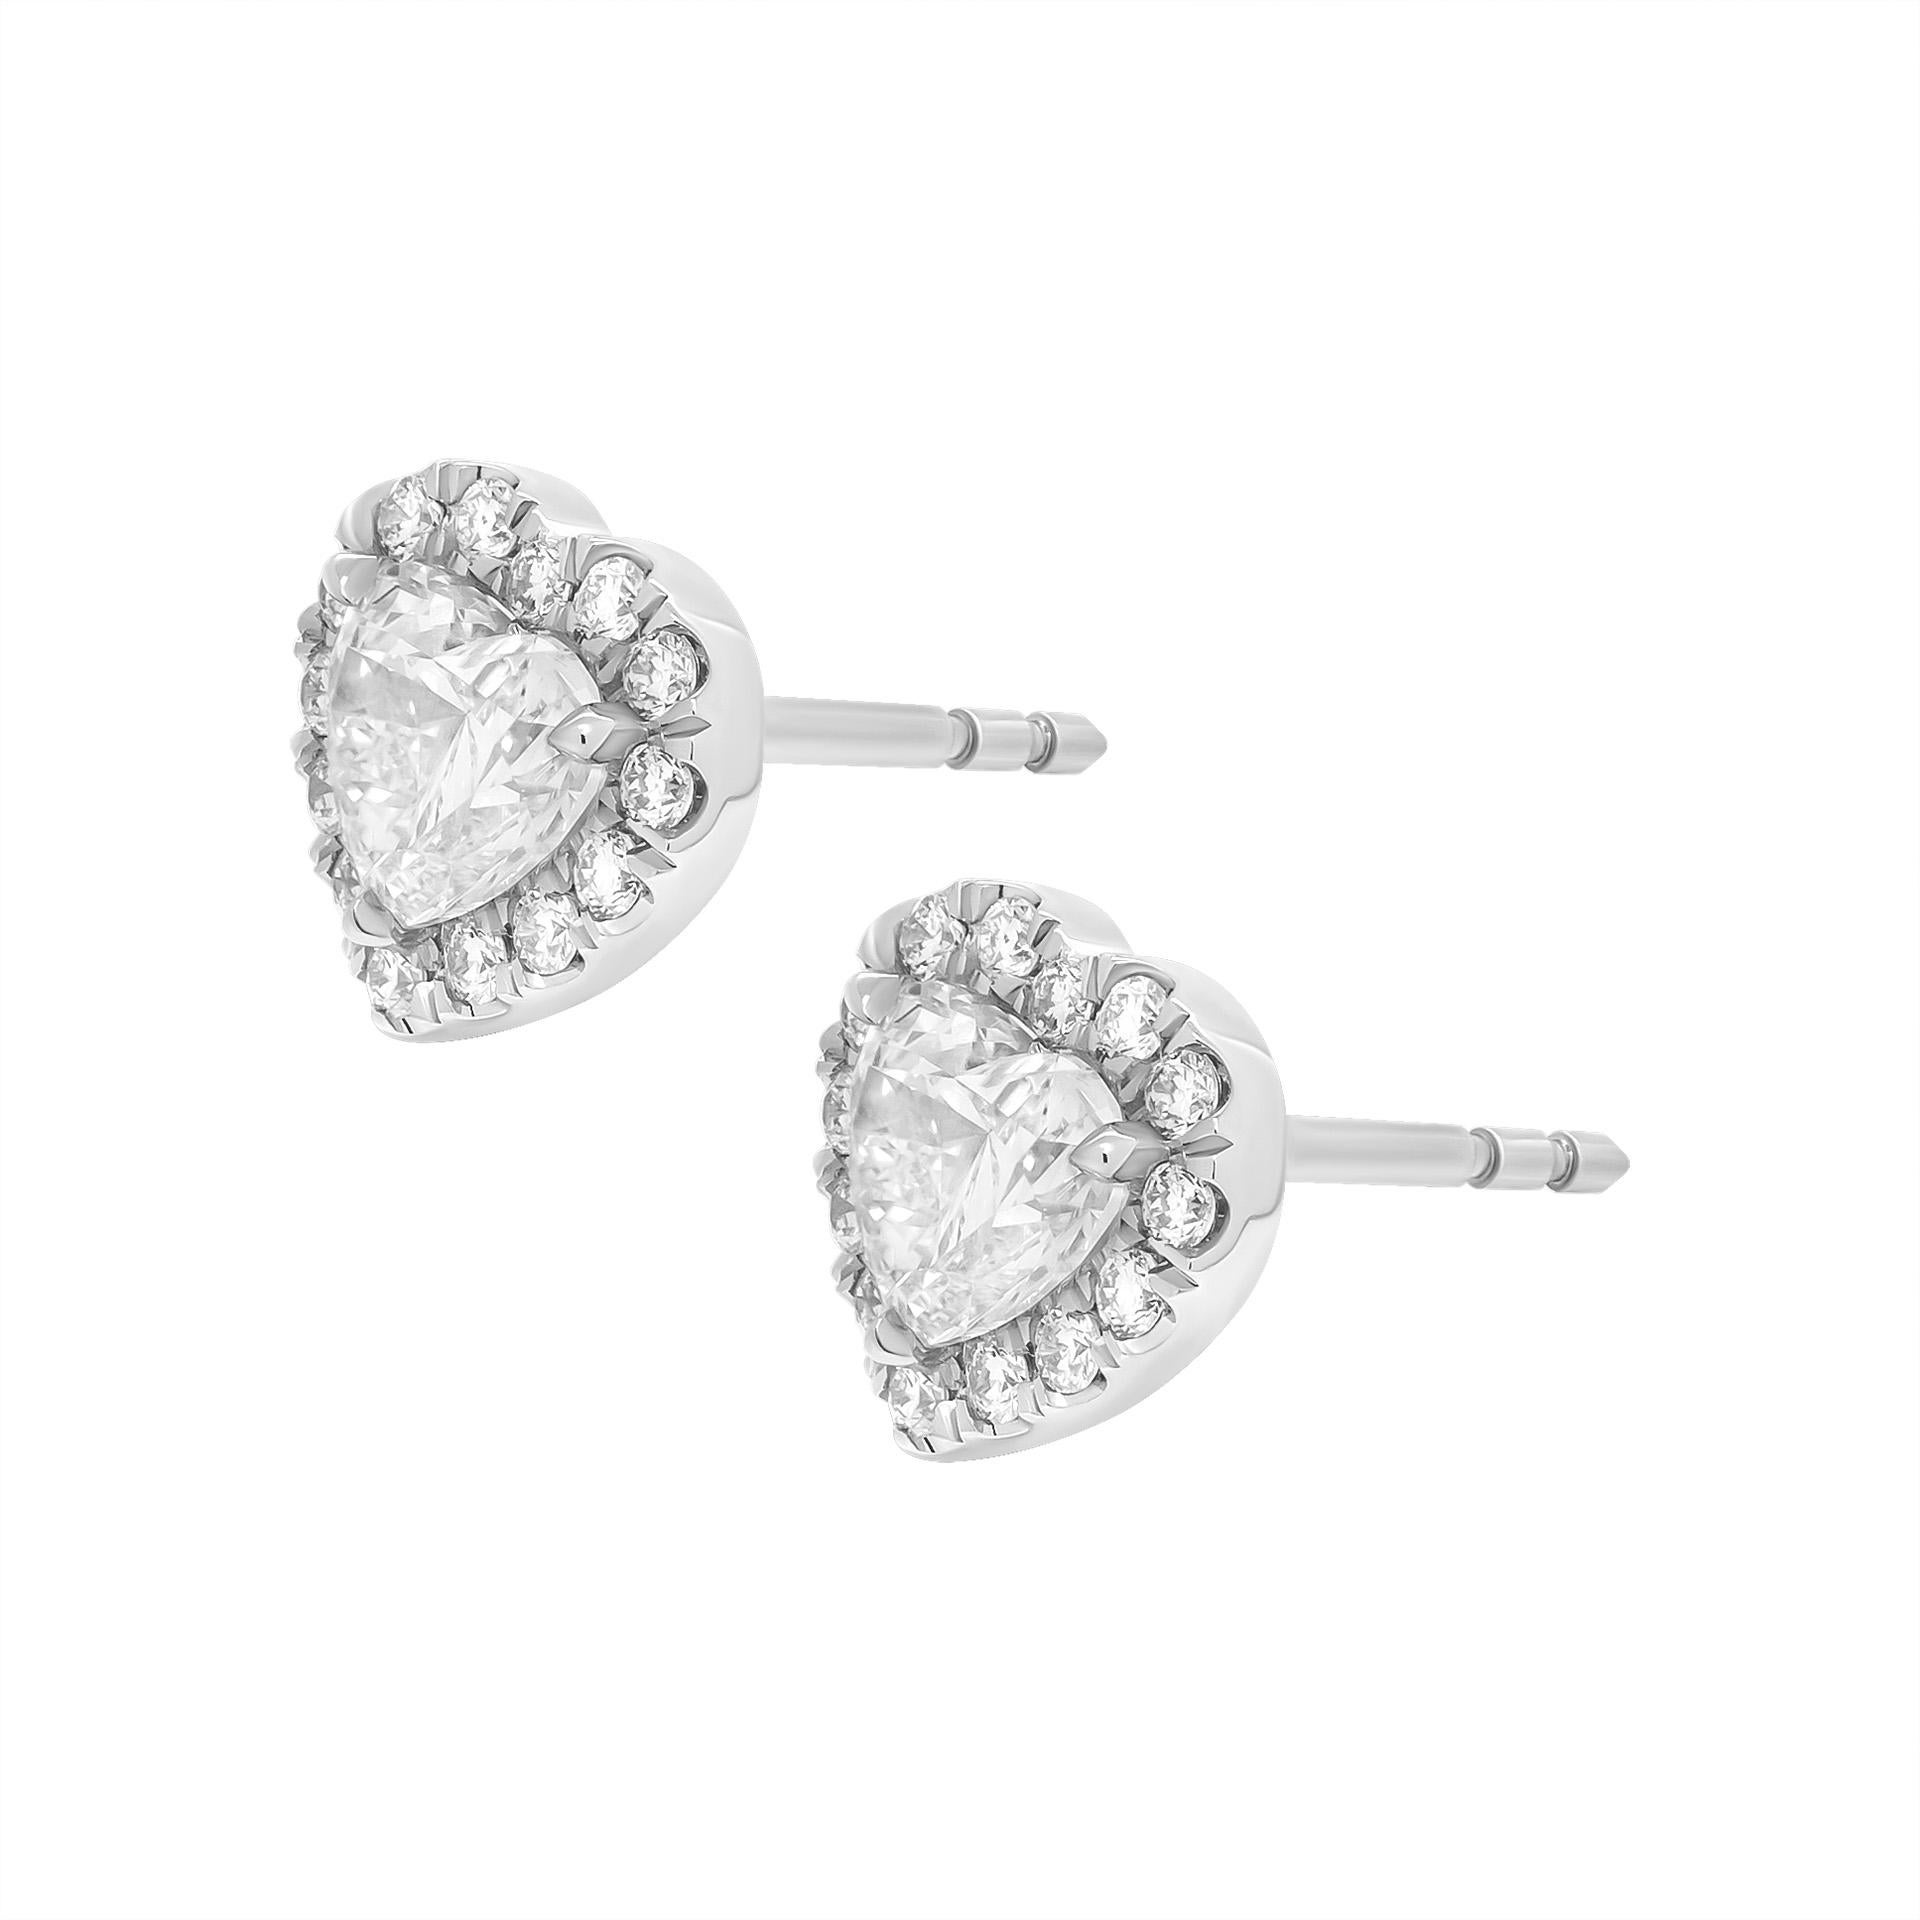 Classic Halo studs with Heart Shape diamonds in Platinum
GIA Certified
0.52ct G VS1 Heart Shape Diamond GIA#5222535001 
0.51ct F VS1 Heart Shape Diamond GIA#7438973071 
Total Carat Weight of pave: 0.21ct ( F/G color VS clarity)